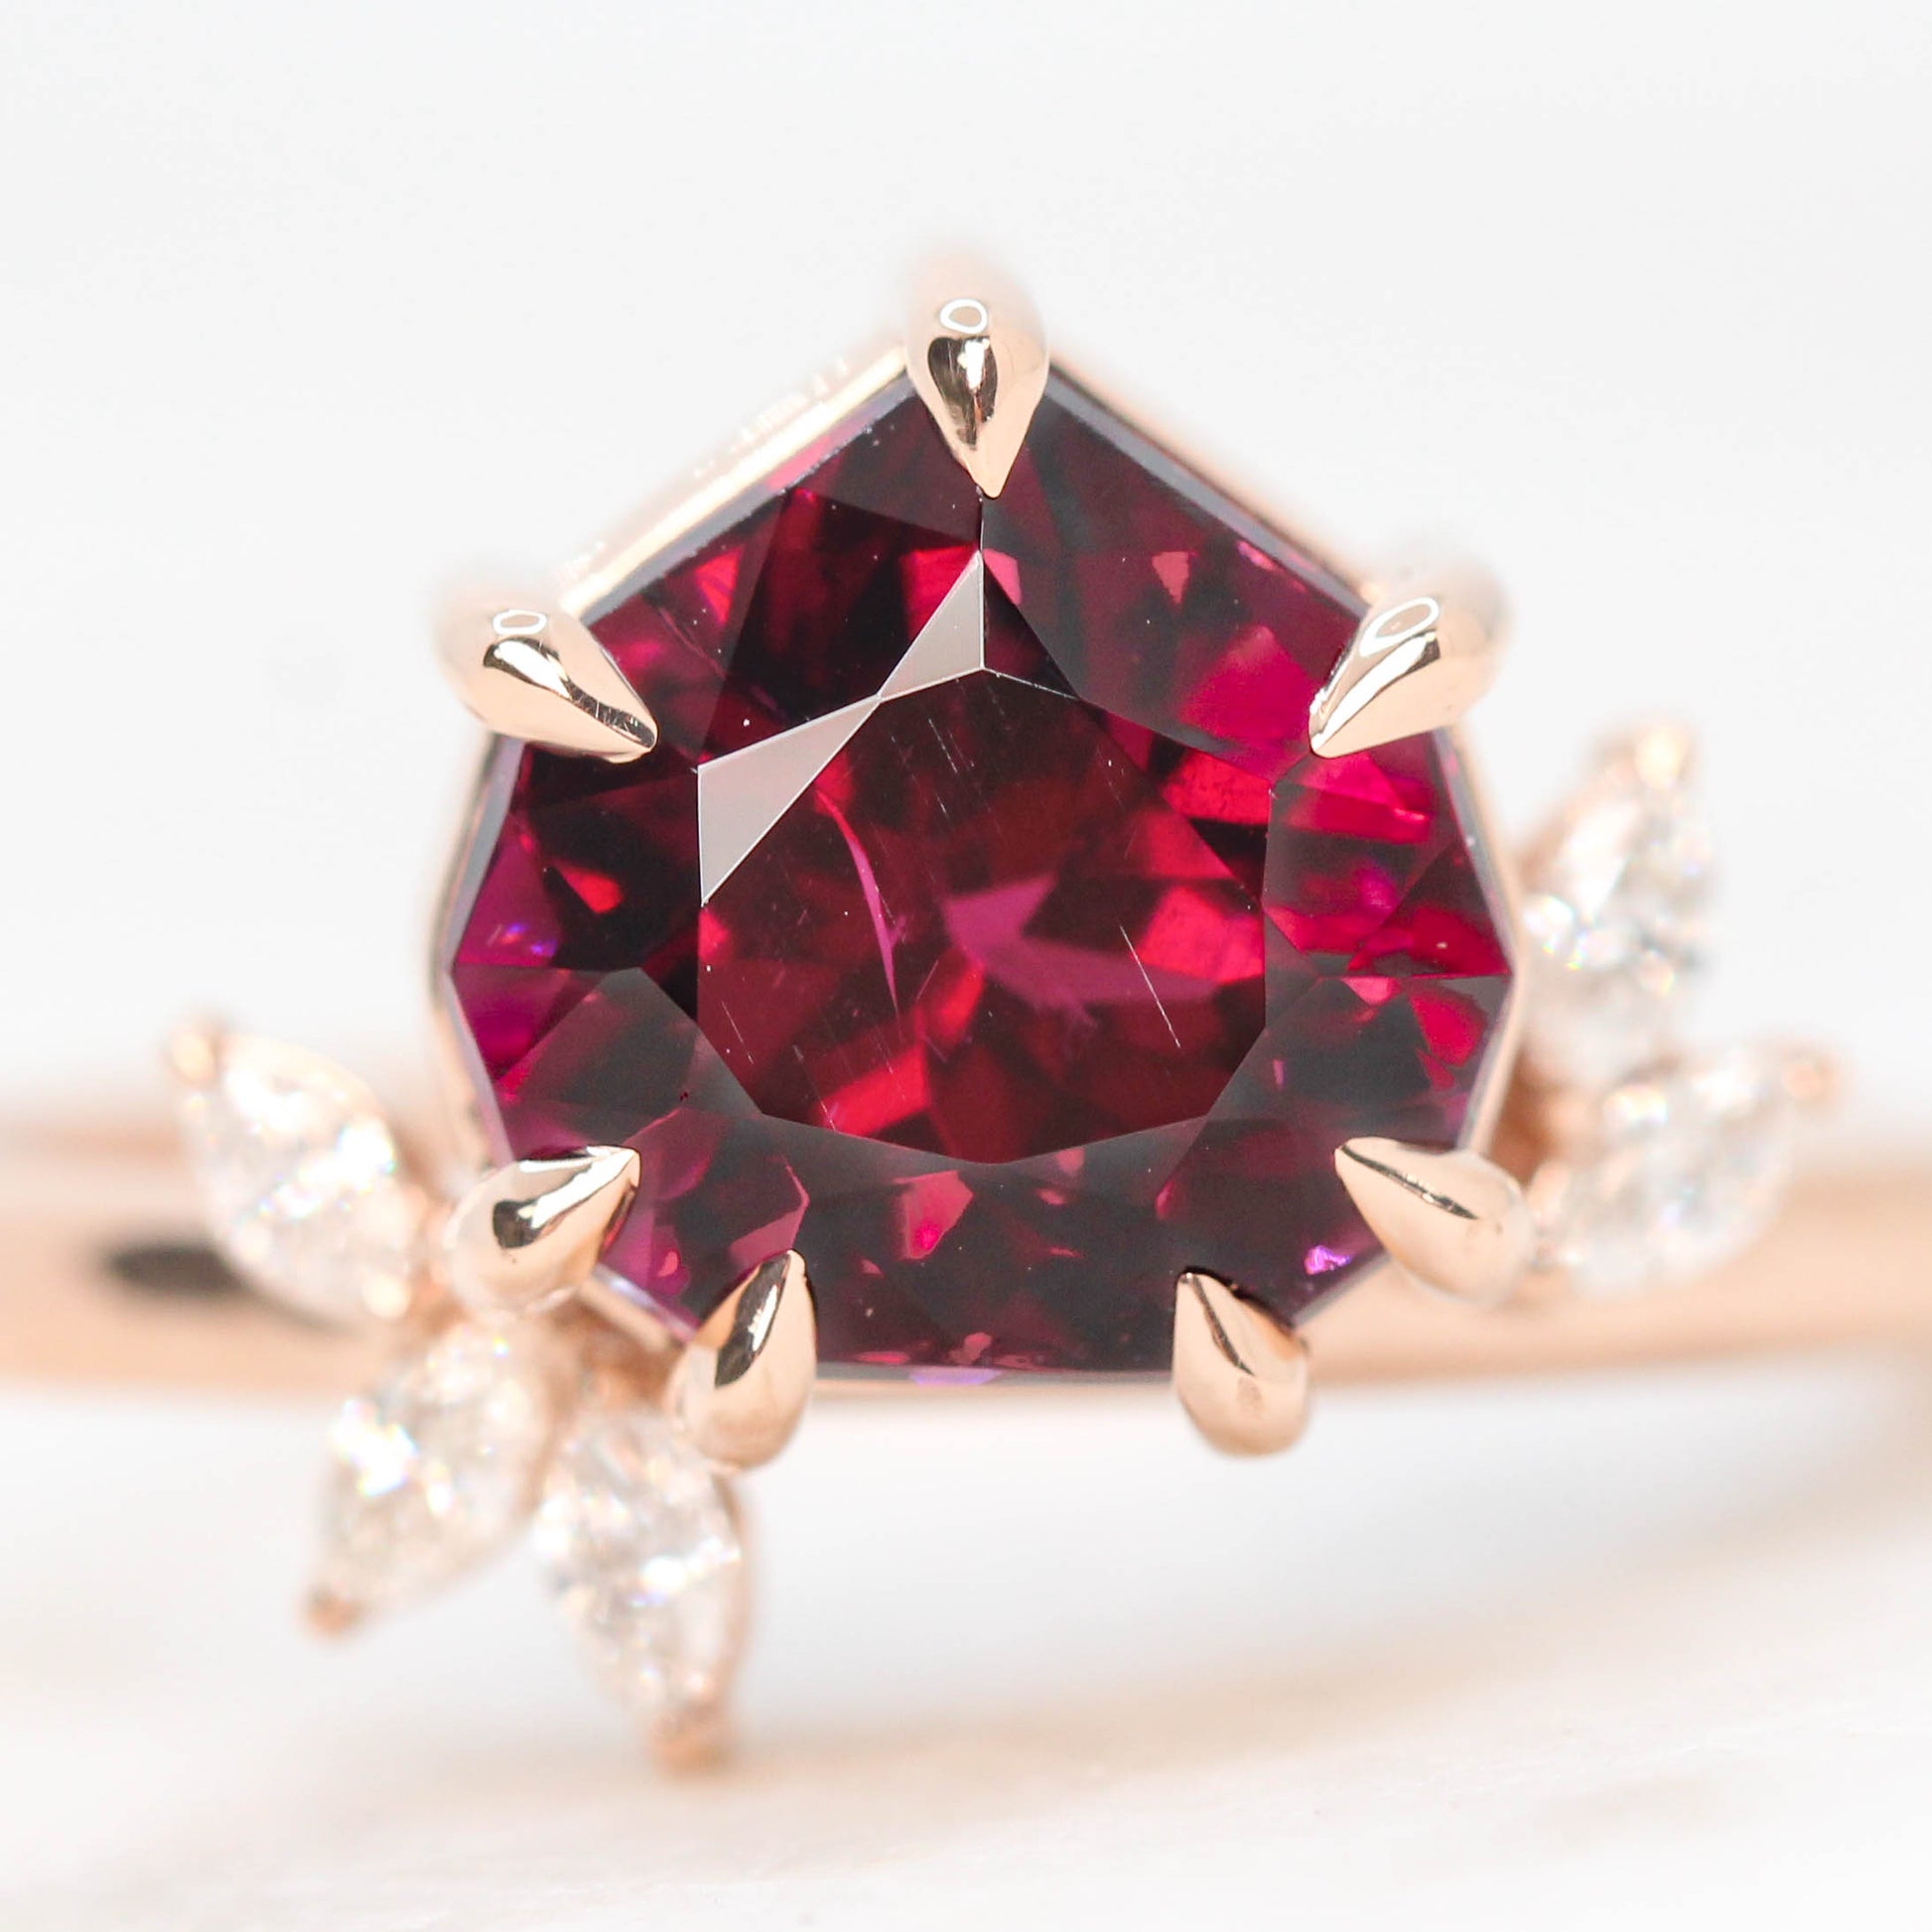 Chantell Ring with a 4.04 Carat Geometric Rhodolite Garnet and White Accent Diamonds in 14k Rose Gold with Matching Band - Ready to Size and Ship - Midwinter Co. Alternative Bridal Rings and Modern Fine Jewelry